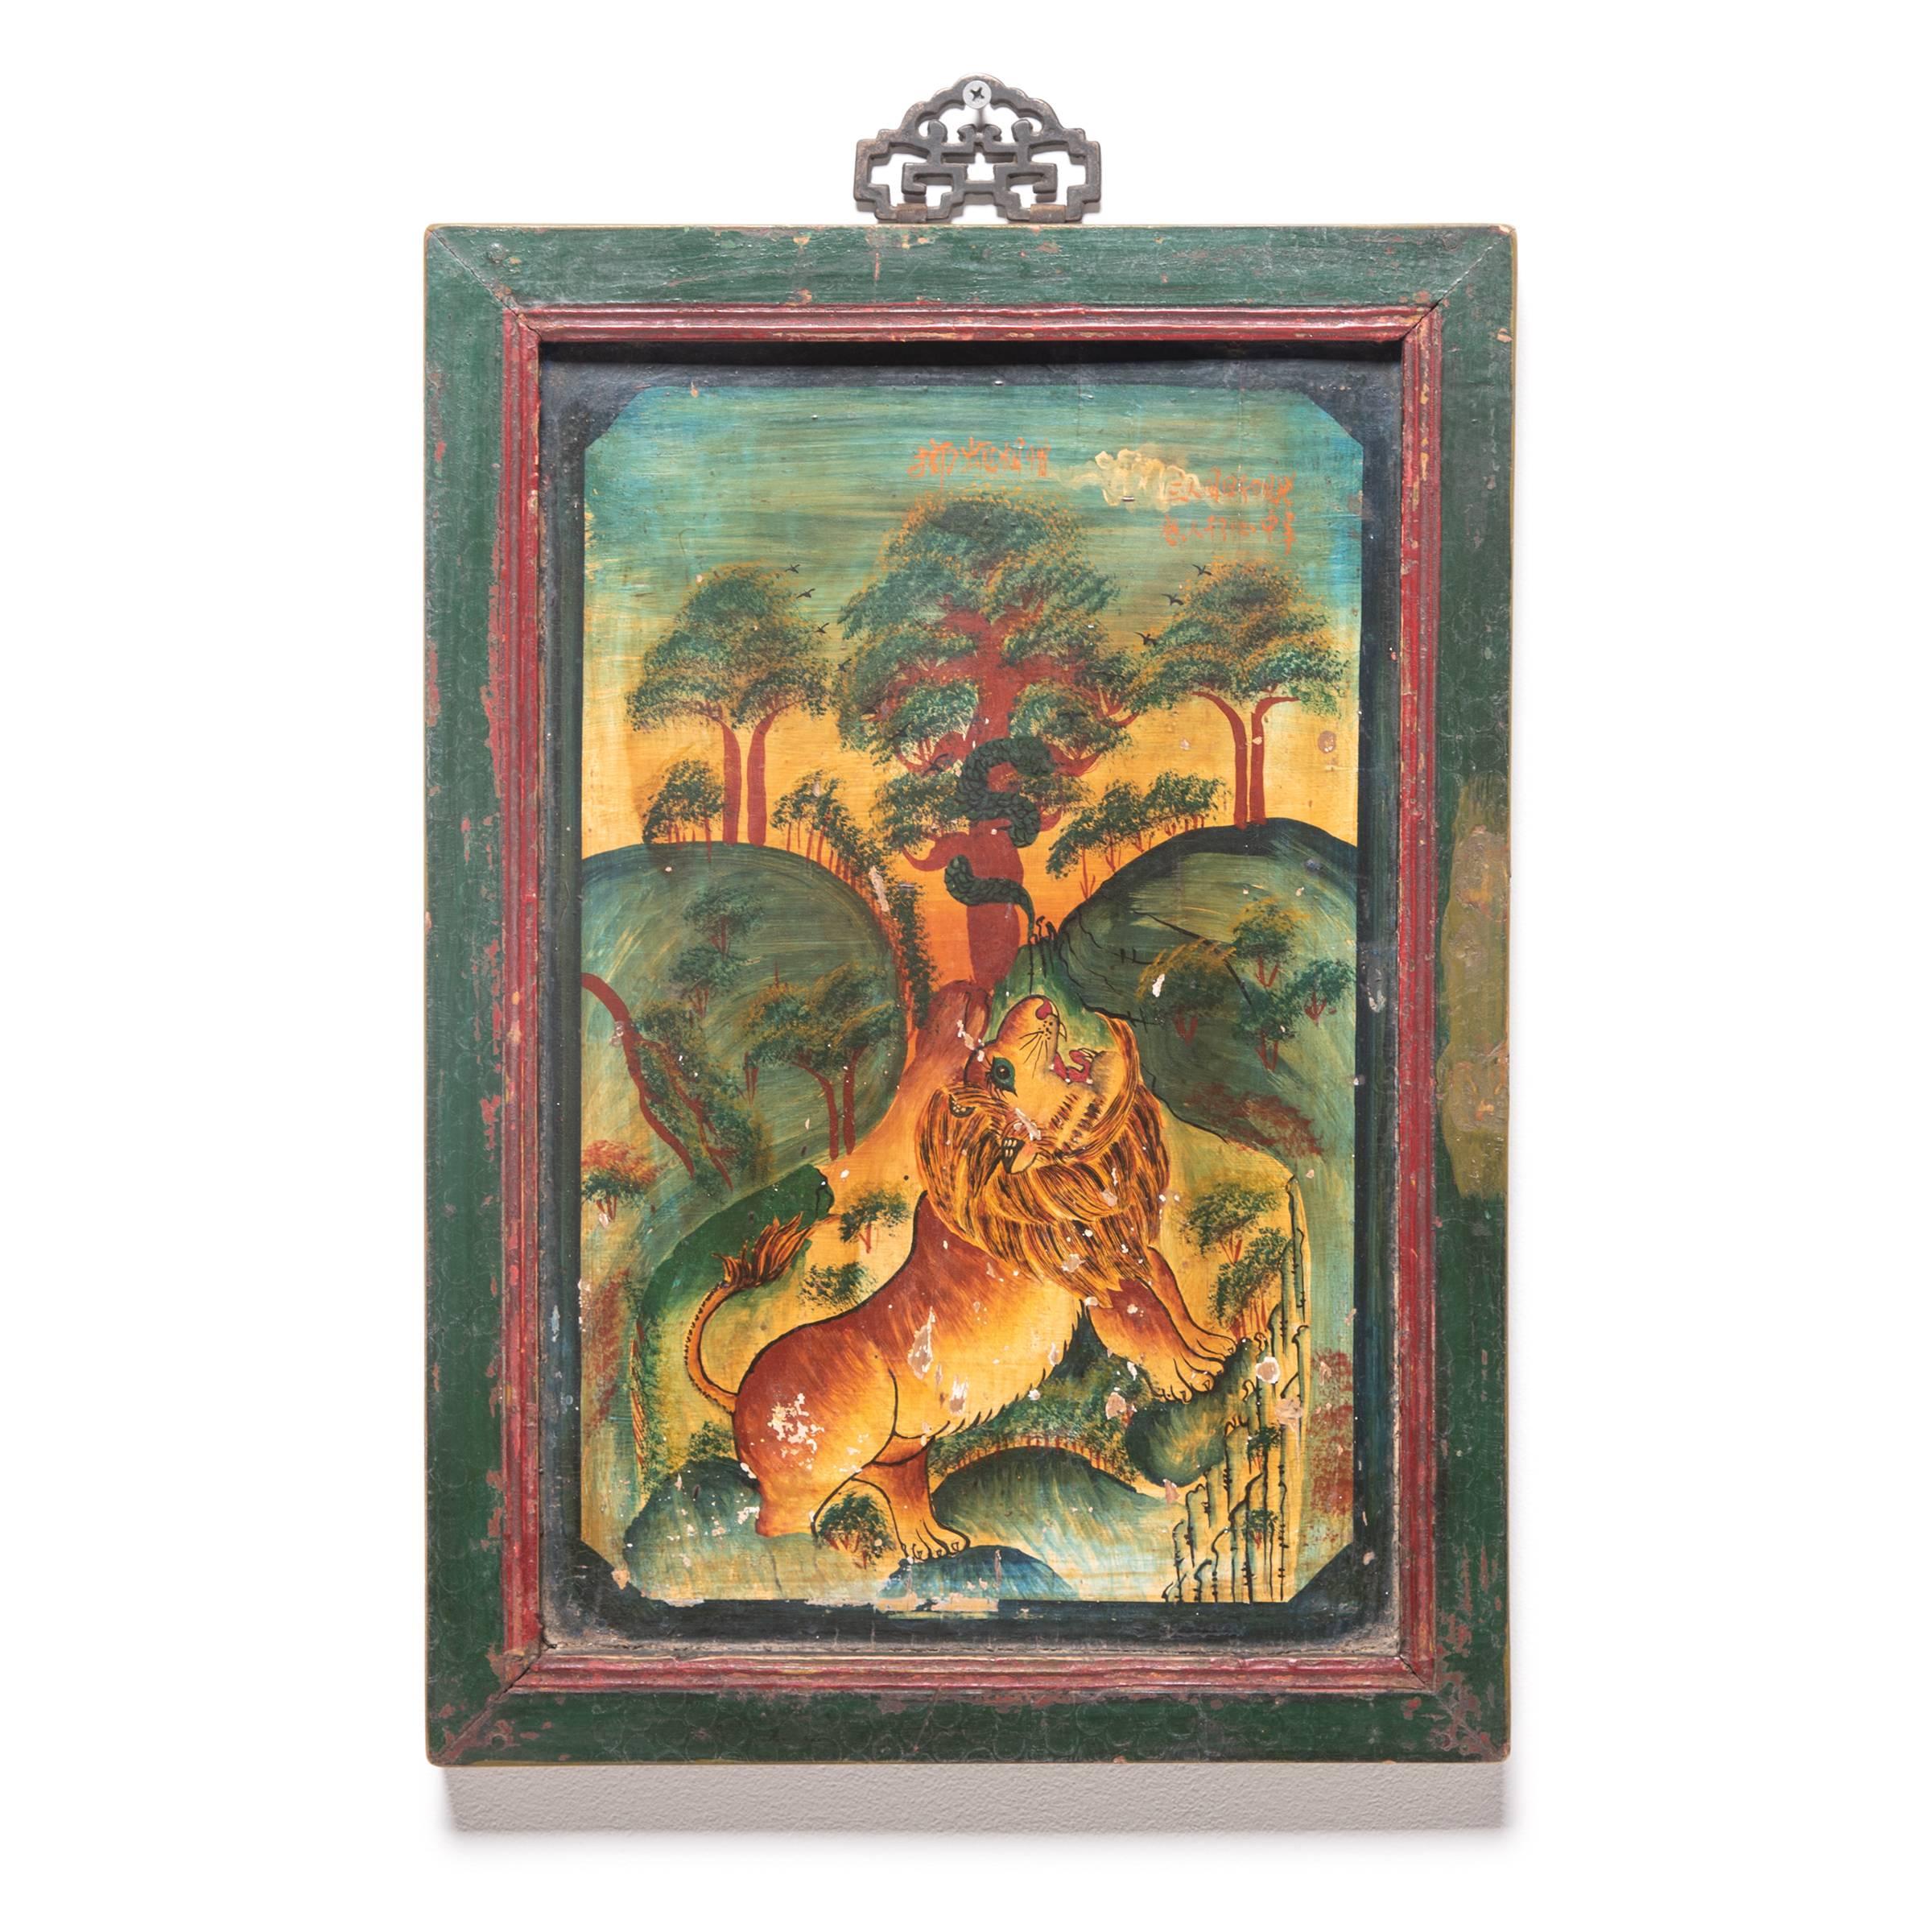 Created in the 1970s just as China was beginning its ascent as a global economic force, this set of four painted panels based on mythological tales seem to foretell the nation’s strength and power. Pictured in what is described as a “yellow mountain